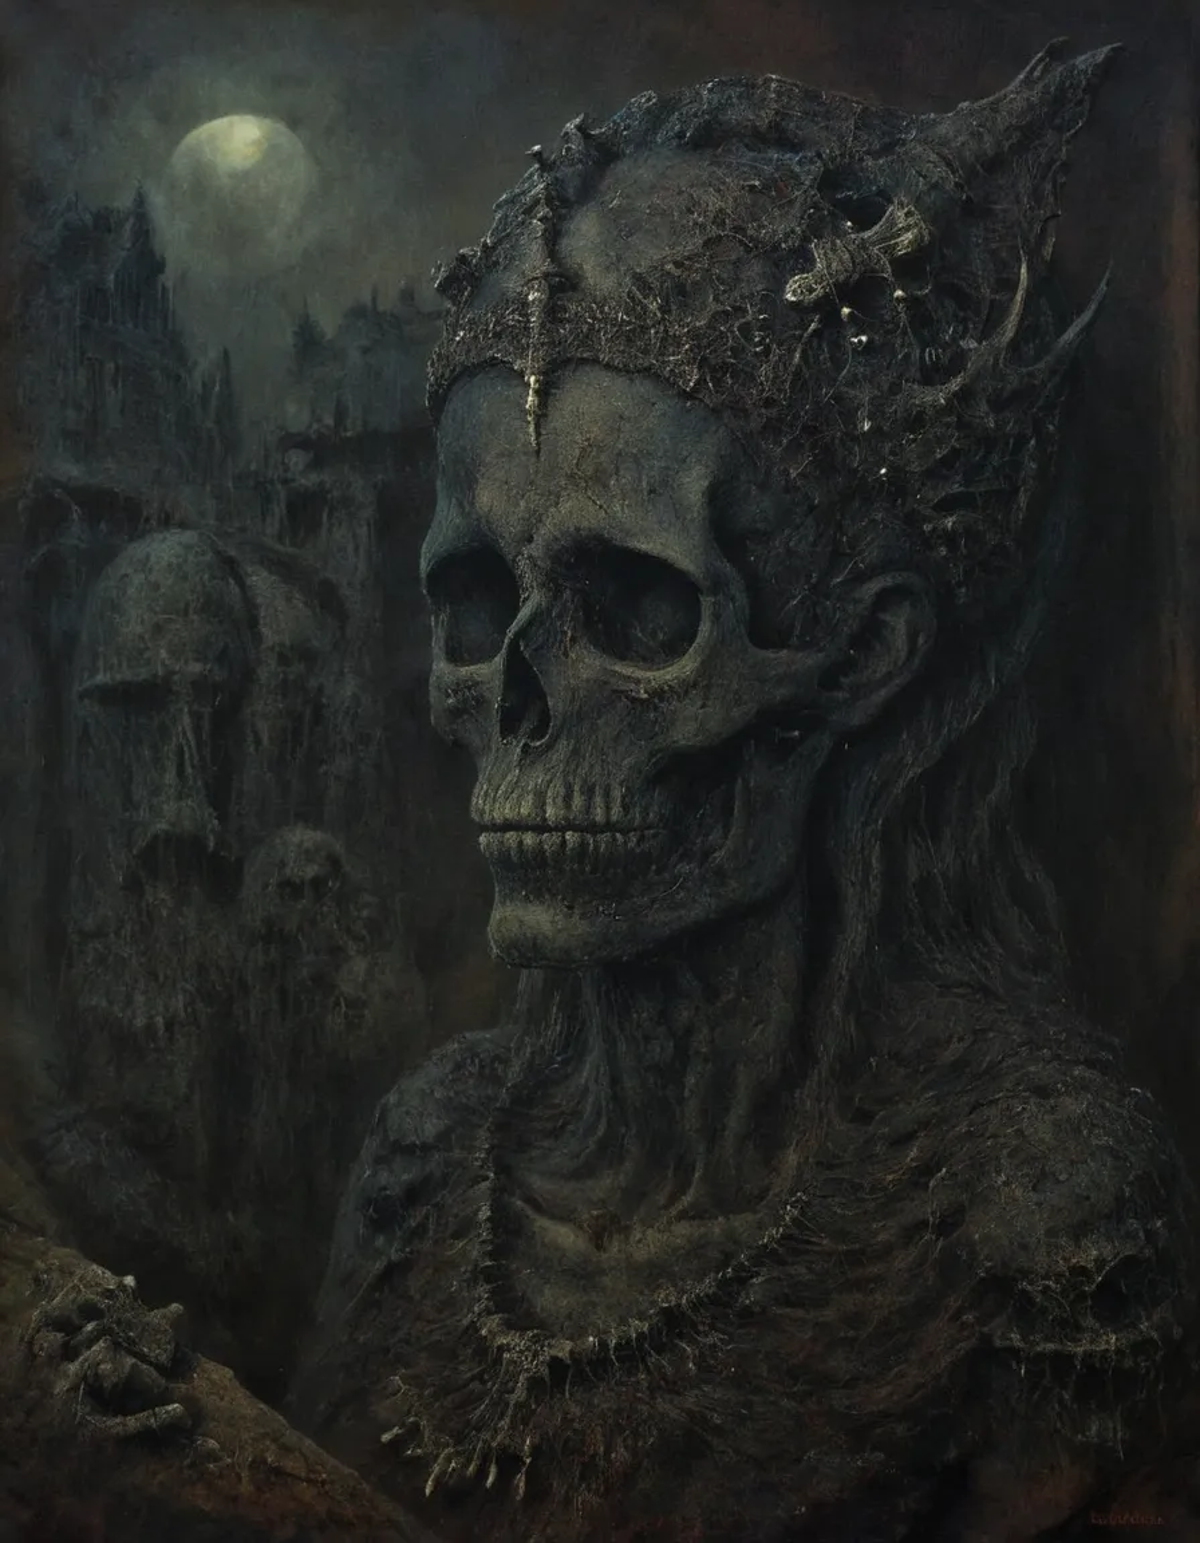 A dark and eerie painting of a skeleton wearing a crown.